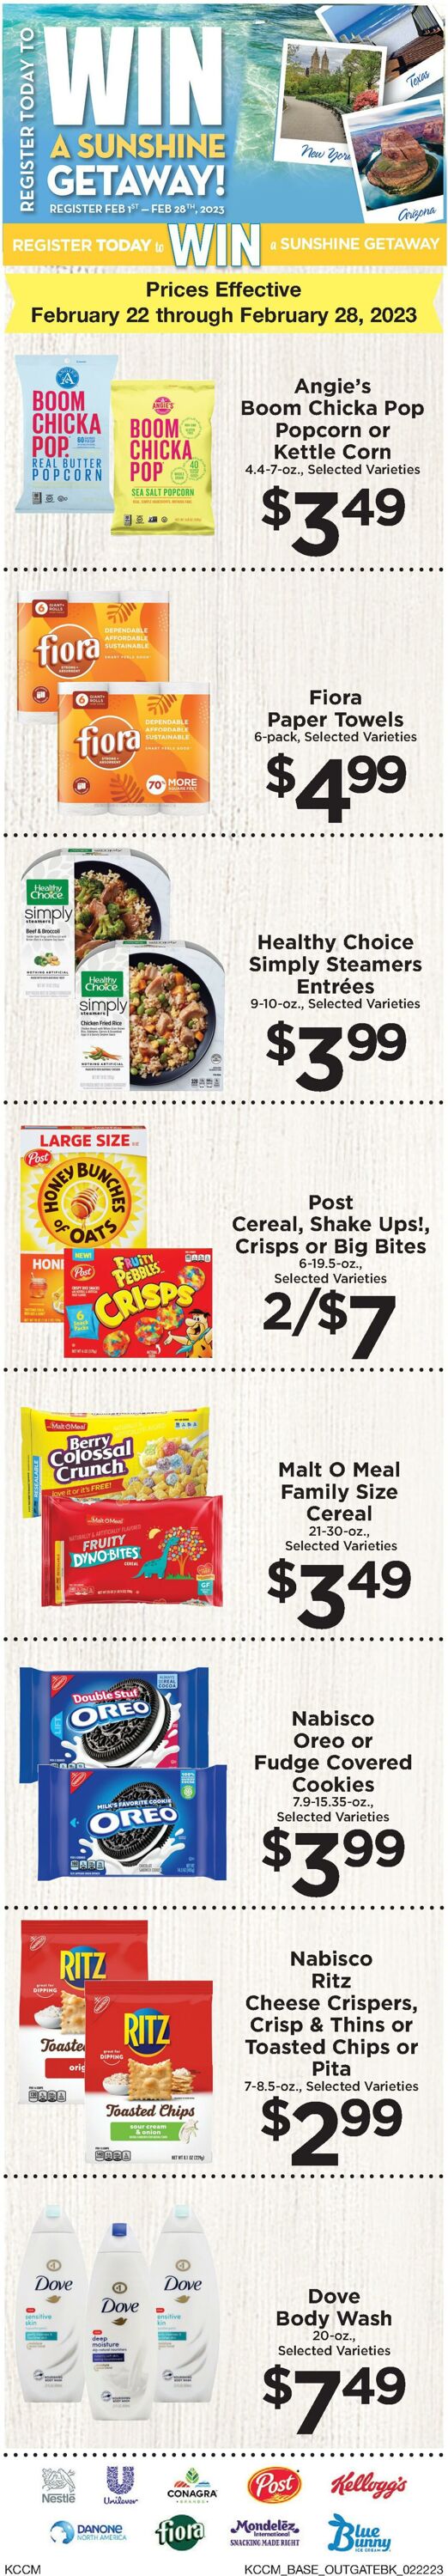 Weekly ad Country Mart 02/22/2023 - 02/28/2023